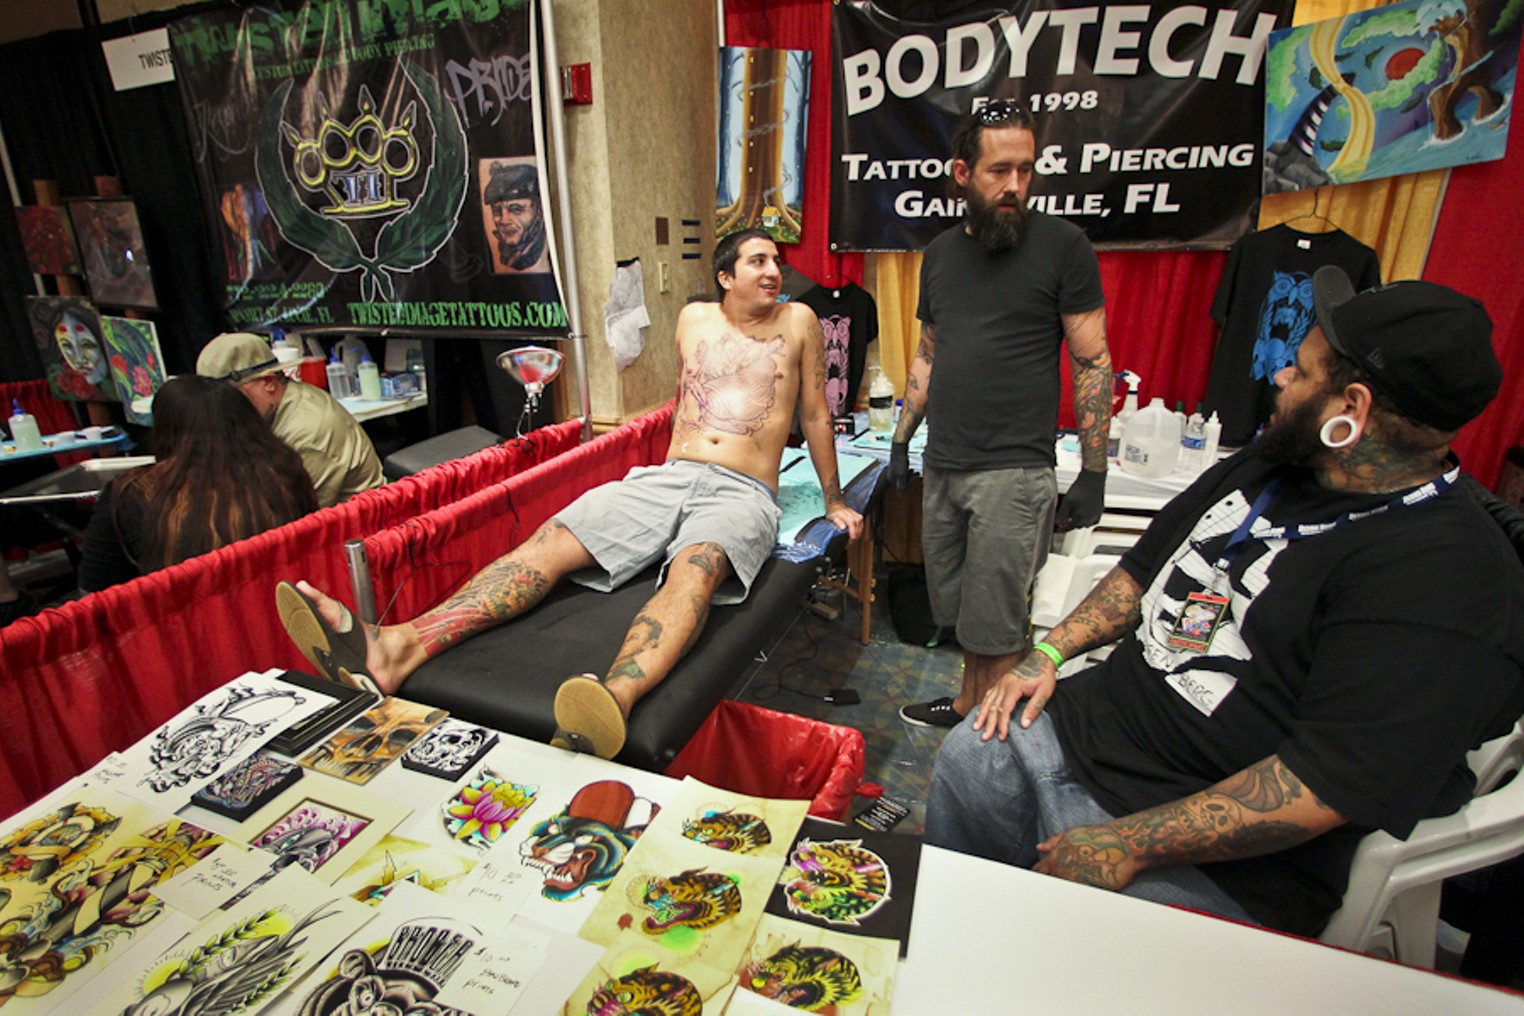 South Florida Tattoo Expo 2012 at Marriott Coral Springs Hotel South